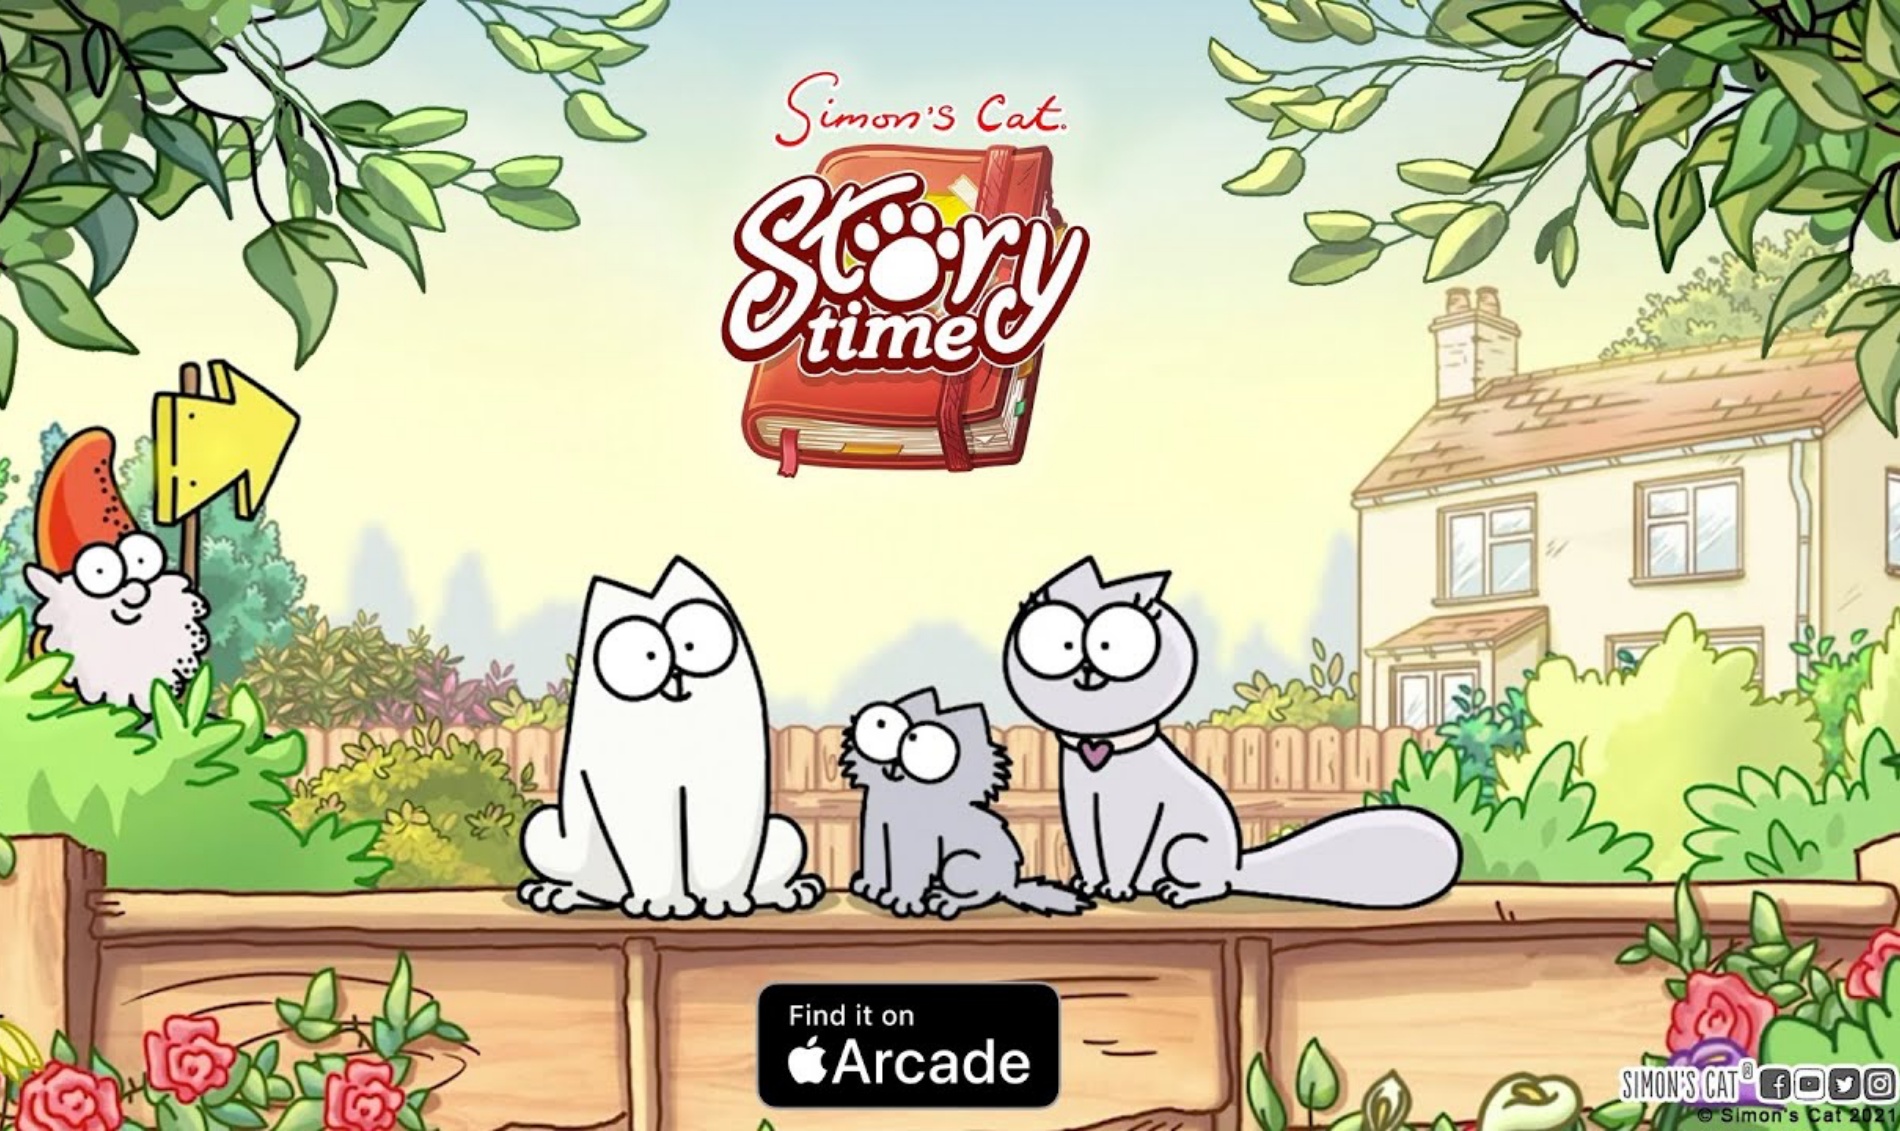 With 20 million downloads in its paws, Simon's Cat seeks more